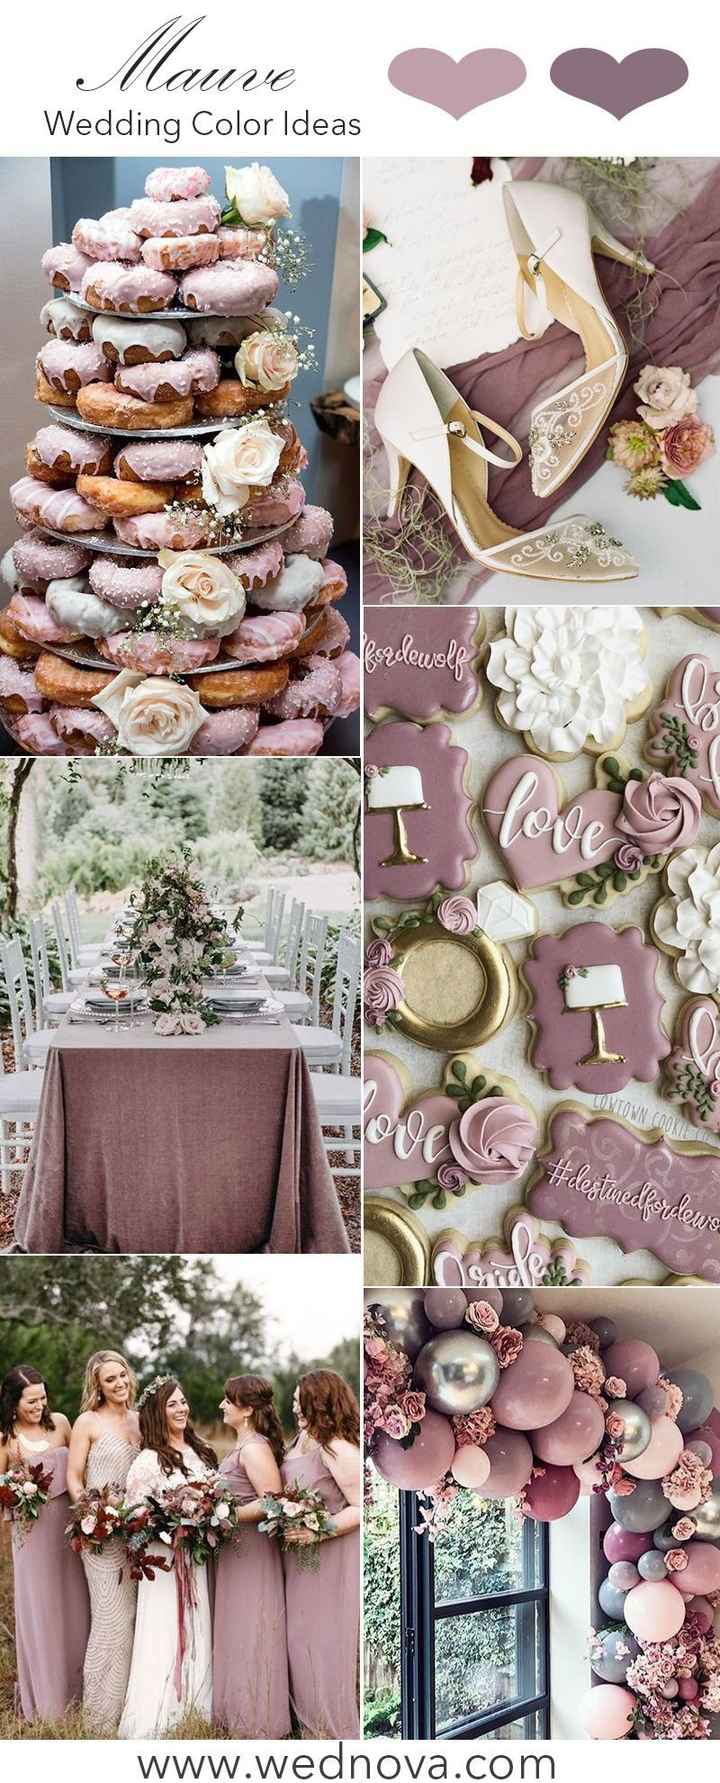 mauve wedding desserts. doughnuts and cookies